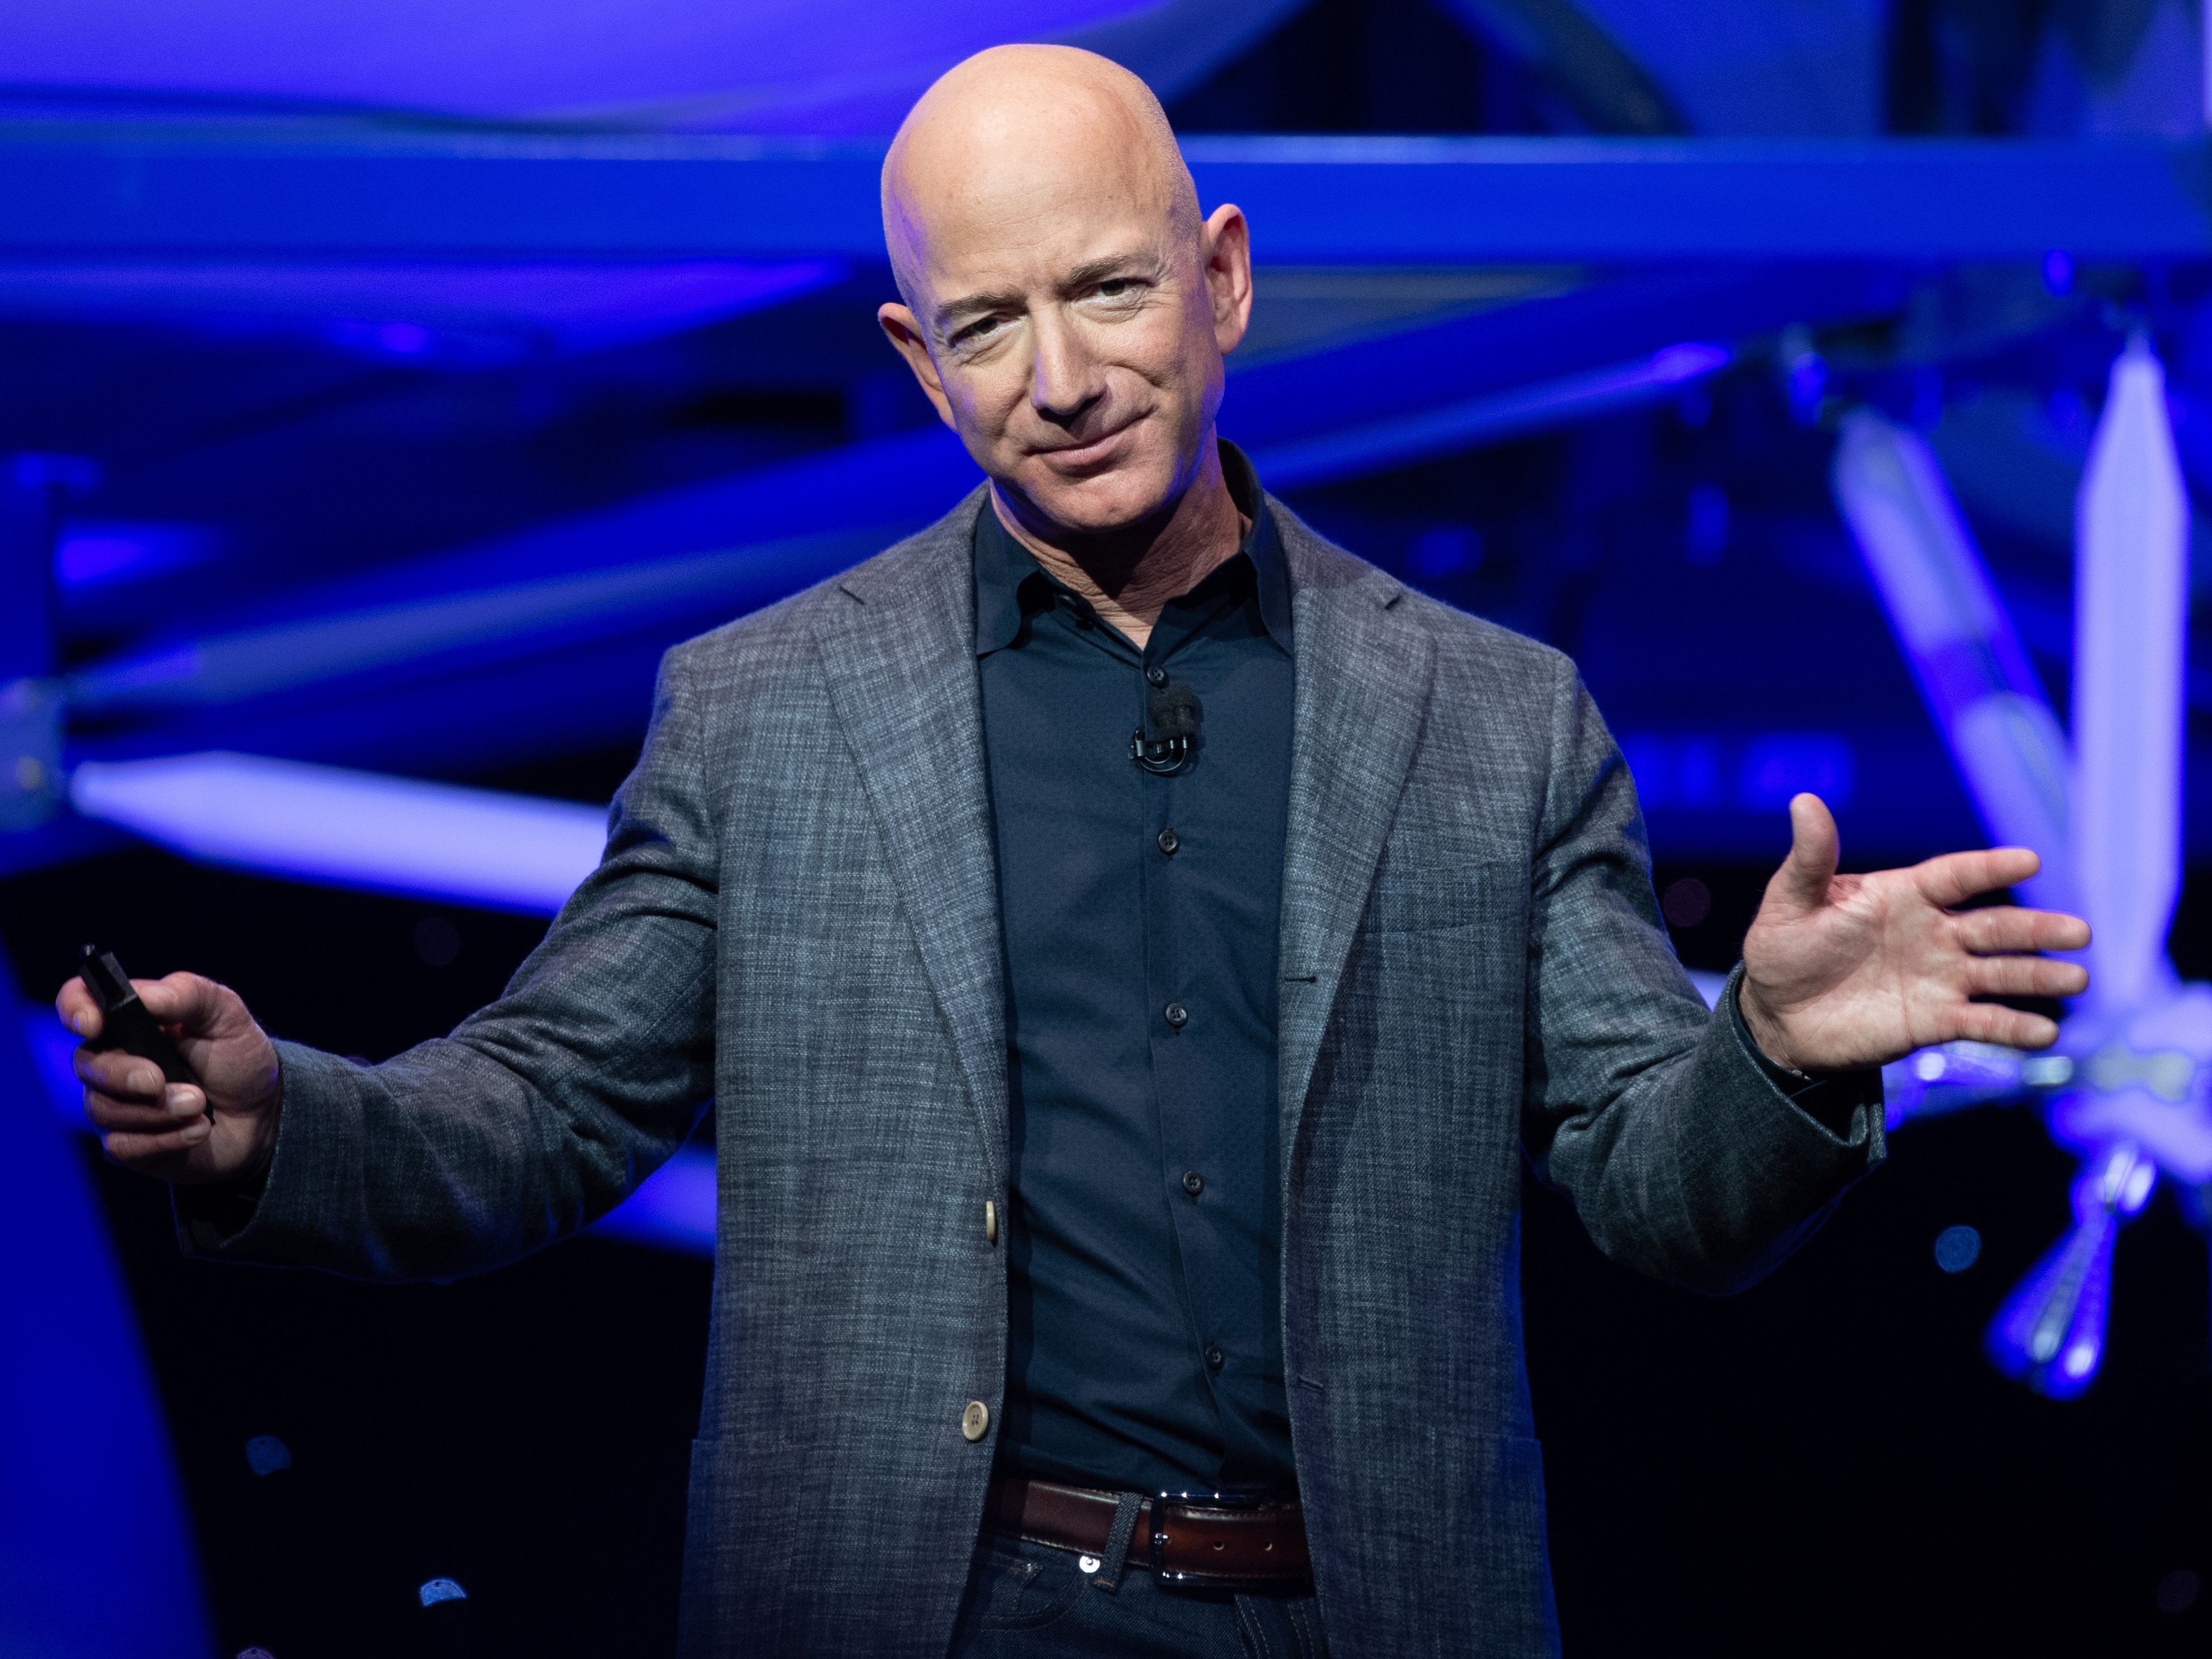 Jeff Bezos stepped down as Amazon CEO, but retained his position as executive chairman